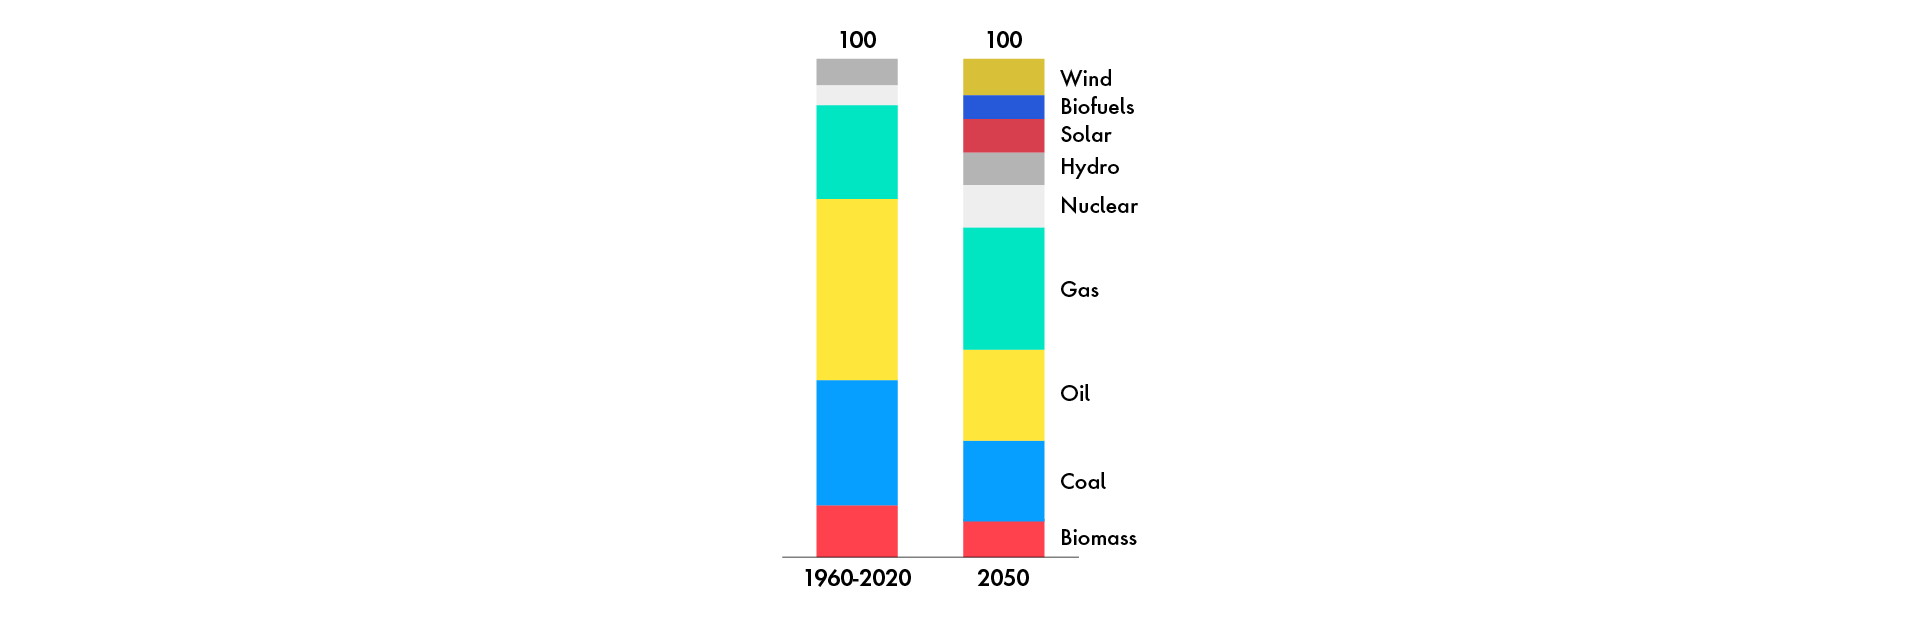 Fragmentation of energy market between 1960 and 2050